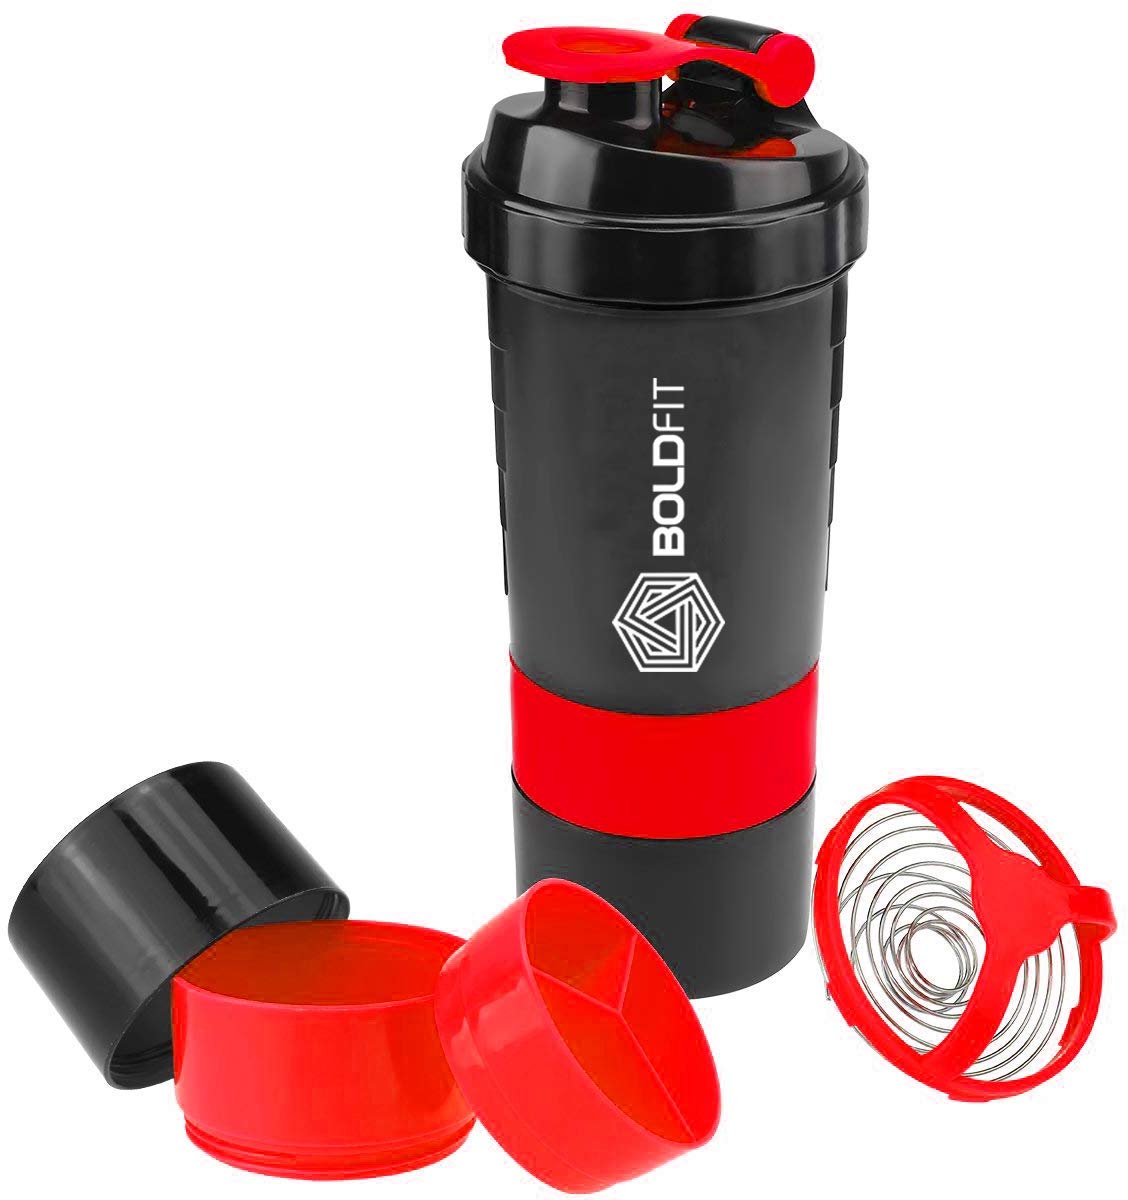 Gym Spider Shaker Bottle 500ml with Extra Compartment